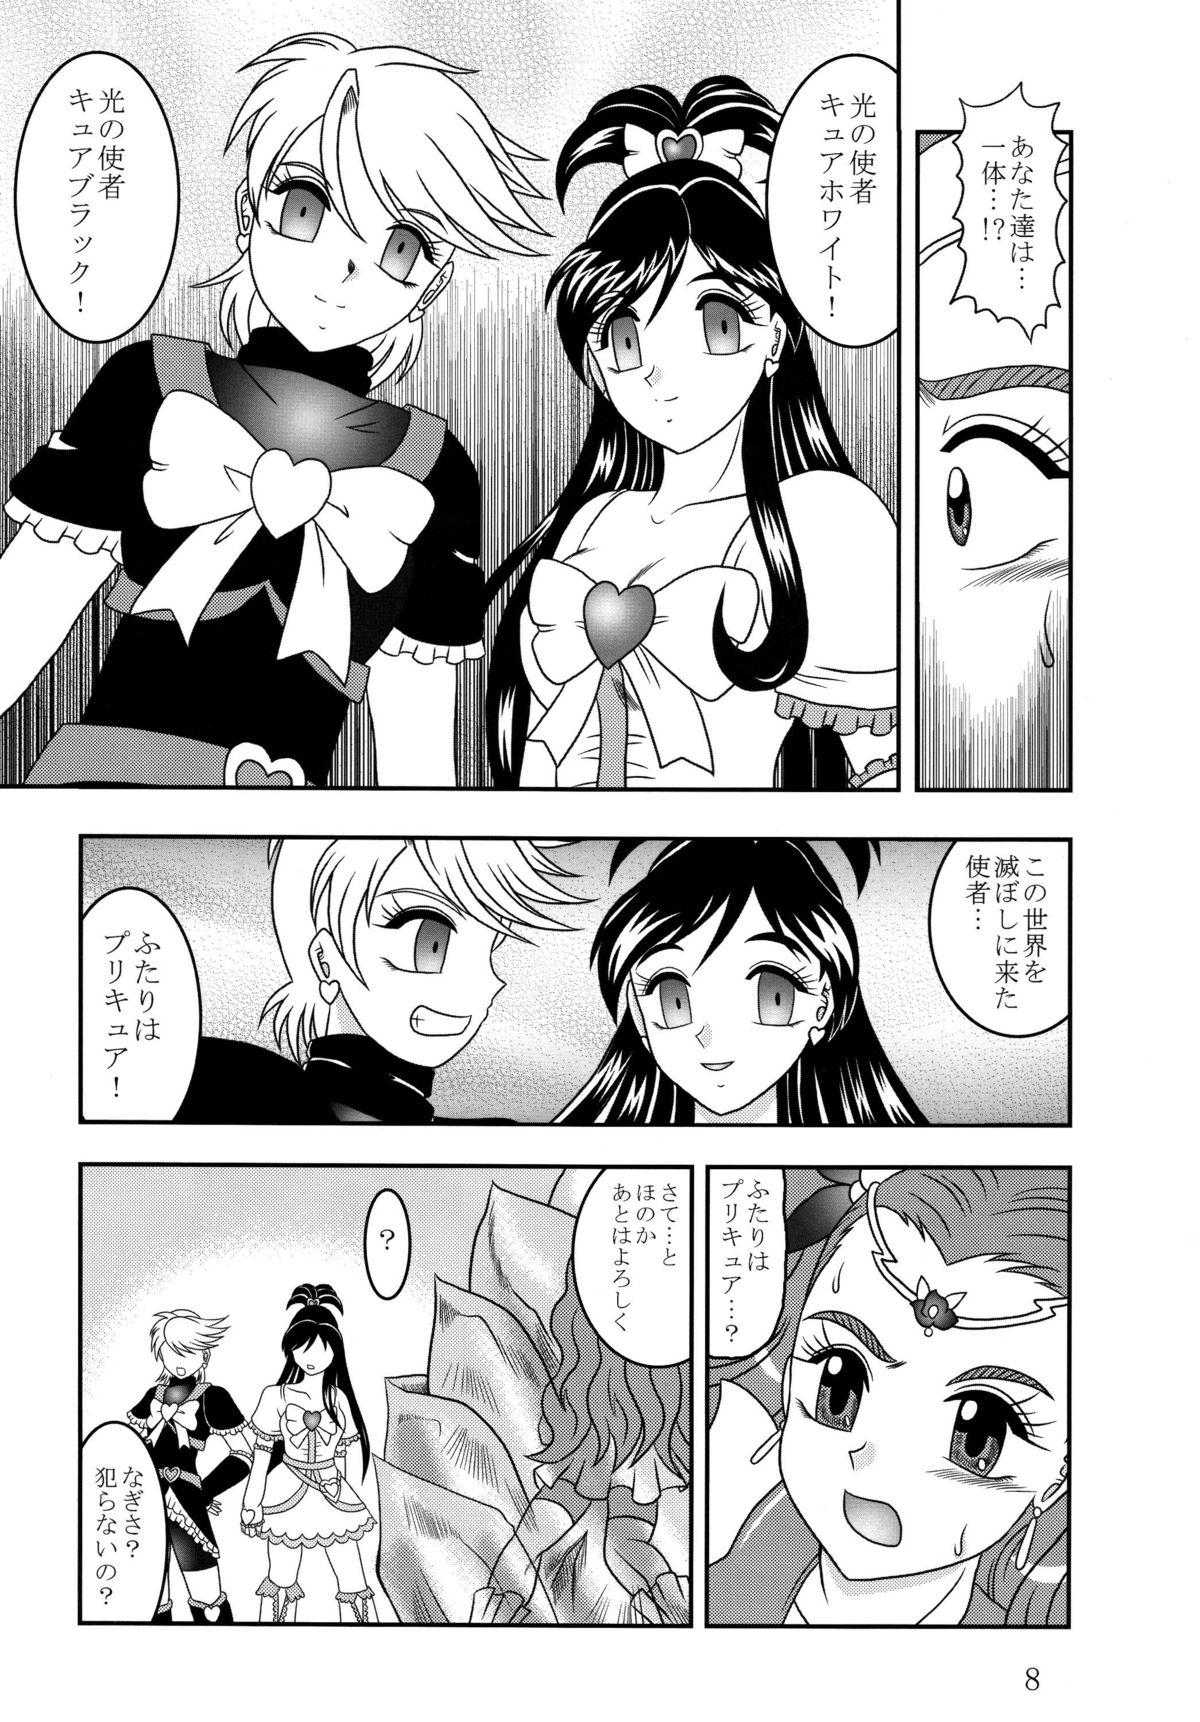 Juggs GREATEST ECLIPSE Frozen Rose - Pretty cure Yes precure 5 Sexo - Page 8